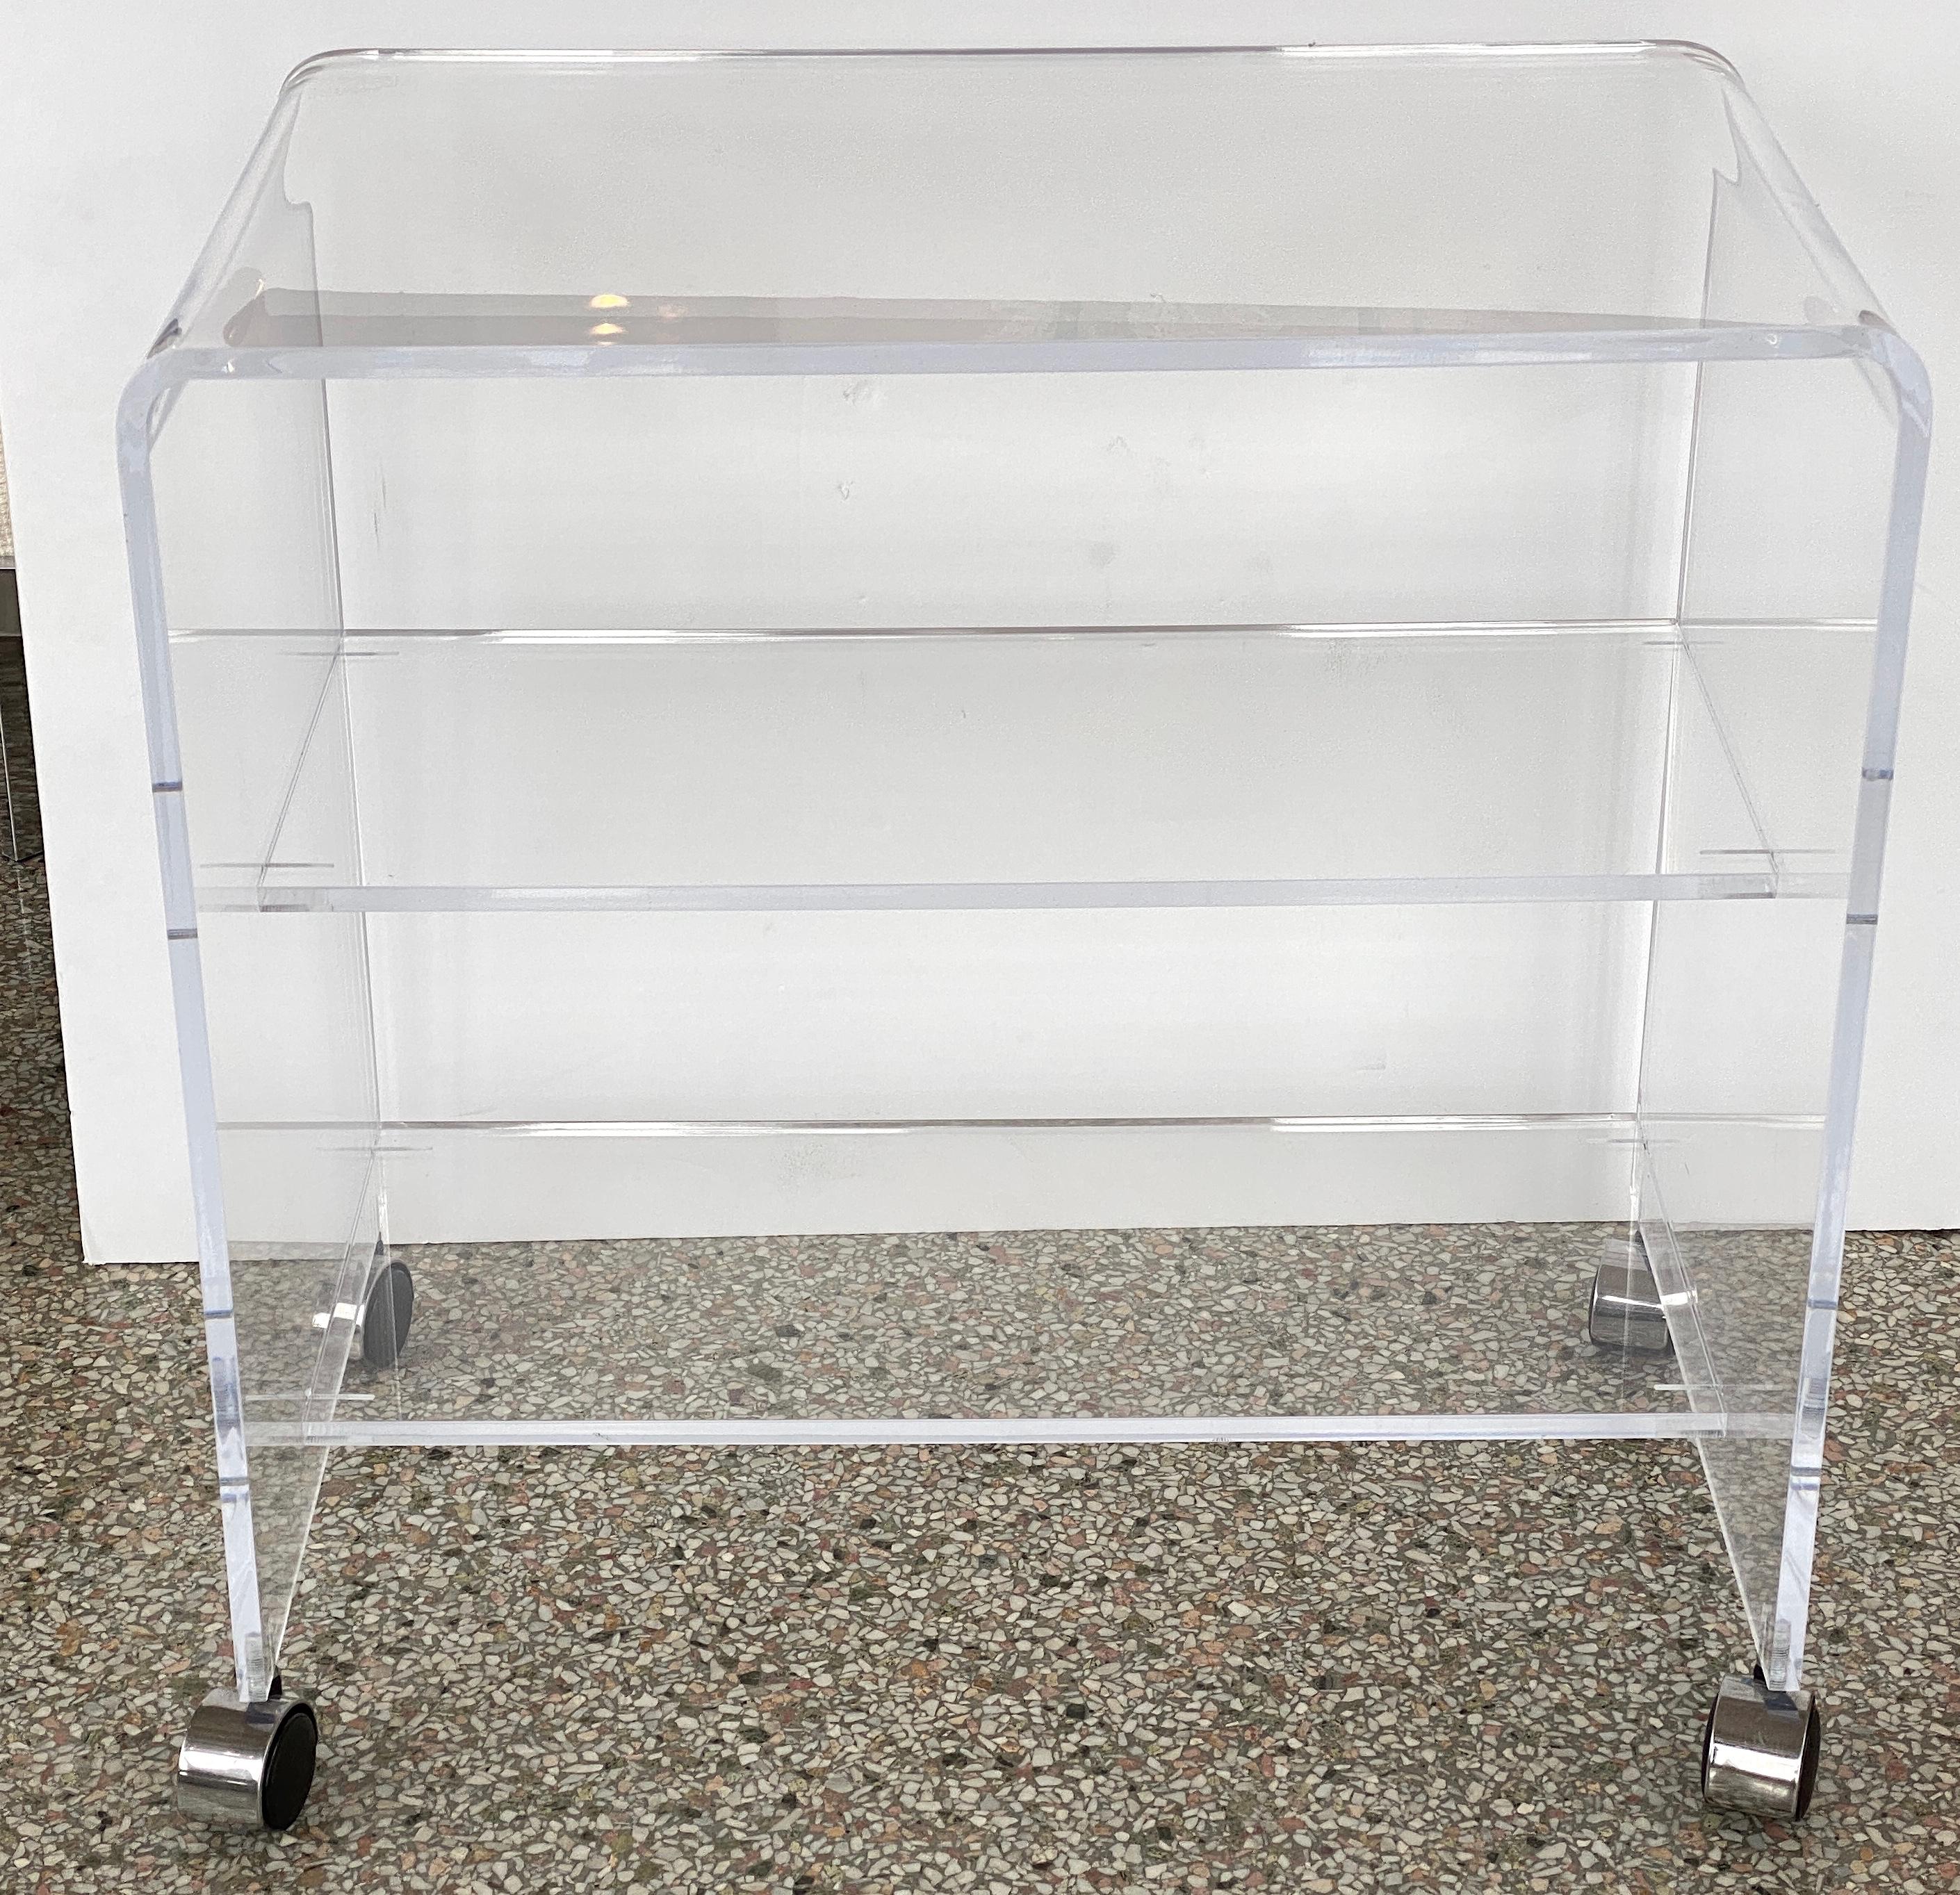 This styish waterfall-form lucite bar cart is very much in the style of pieces created by Holllis Jones.

Note: Overall measurements are 26